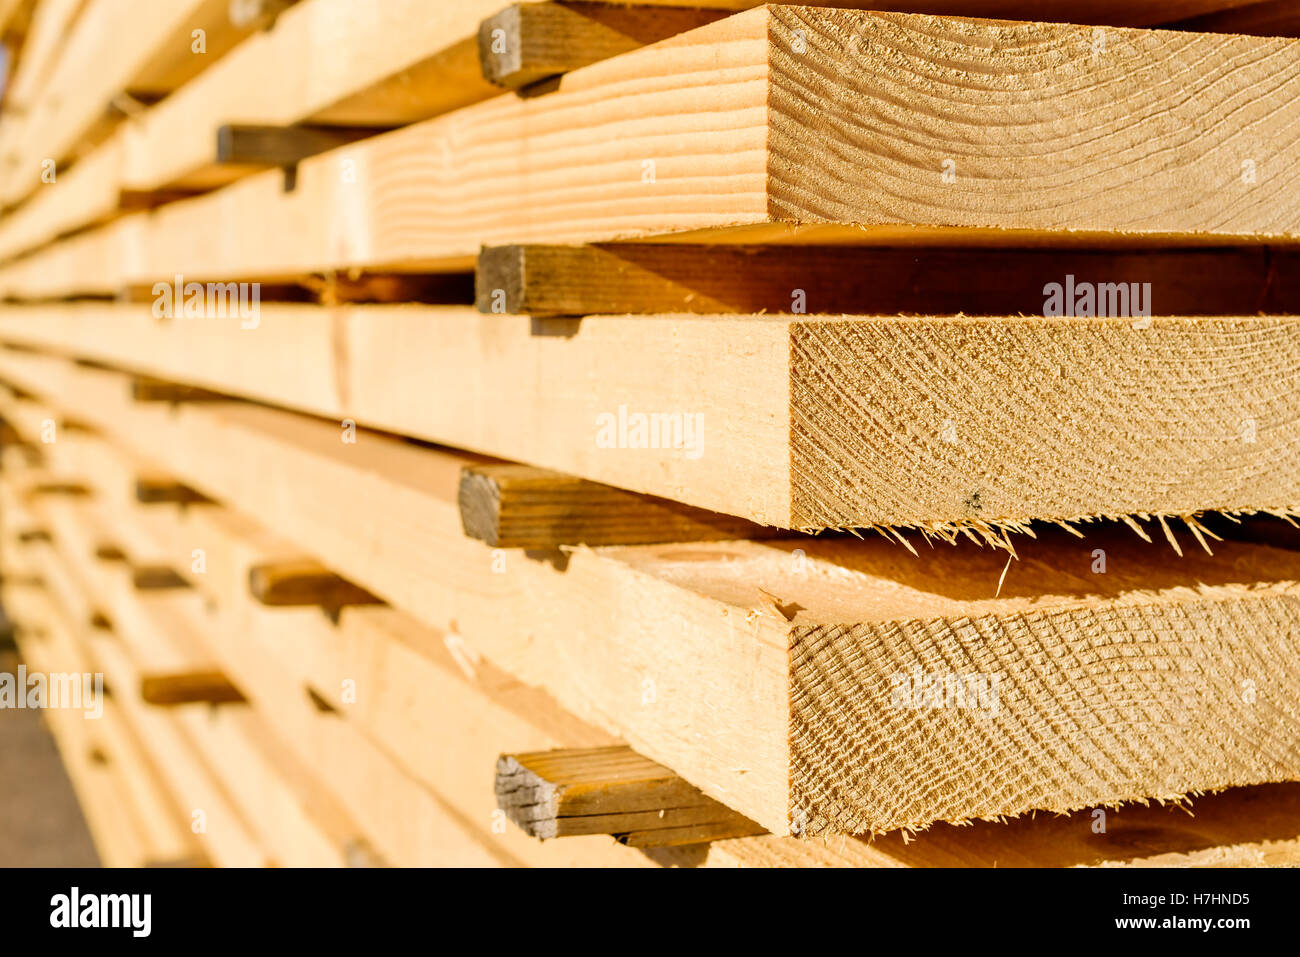 Corner parts of stacked lumber or timber. Stock Photo